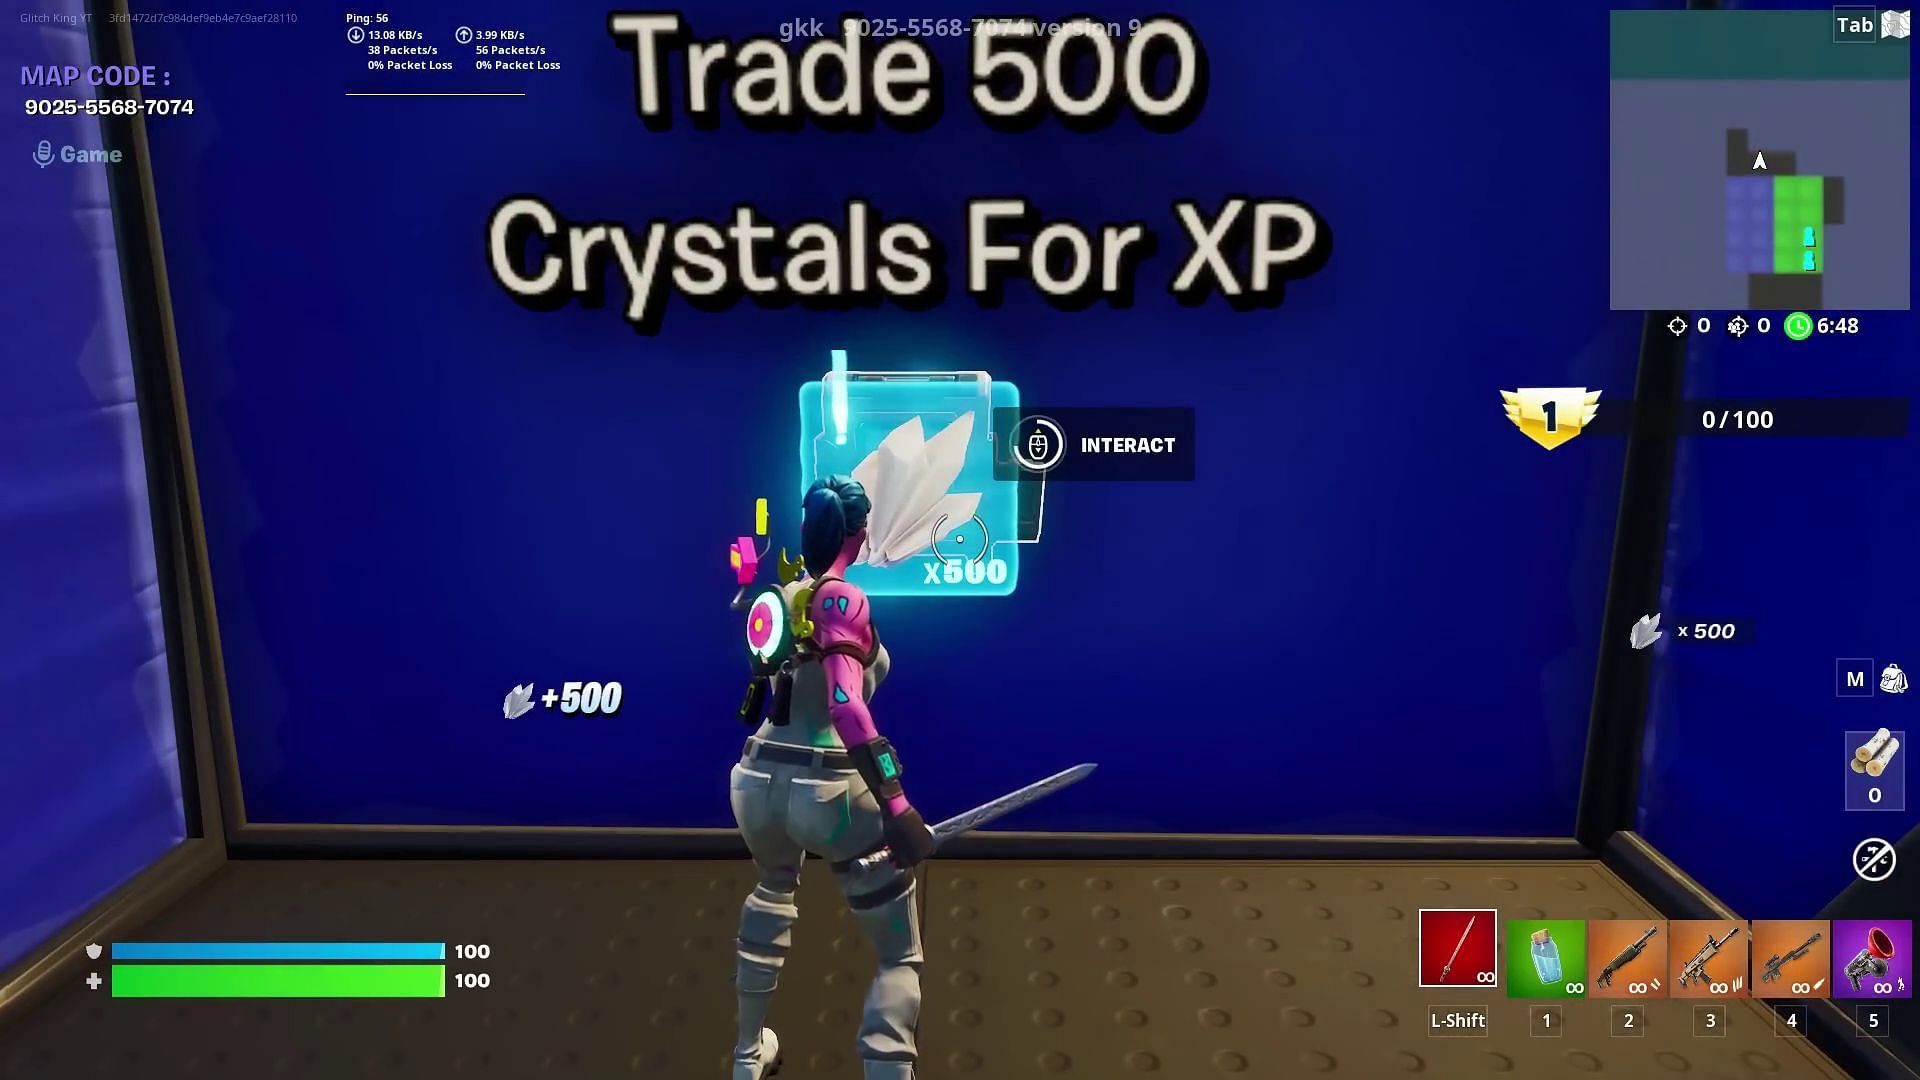 Loopers would need to collect 500 crystals to gain enormous XP (Image via YouTube/GKI)